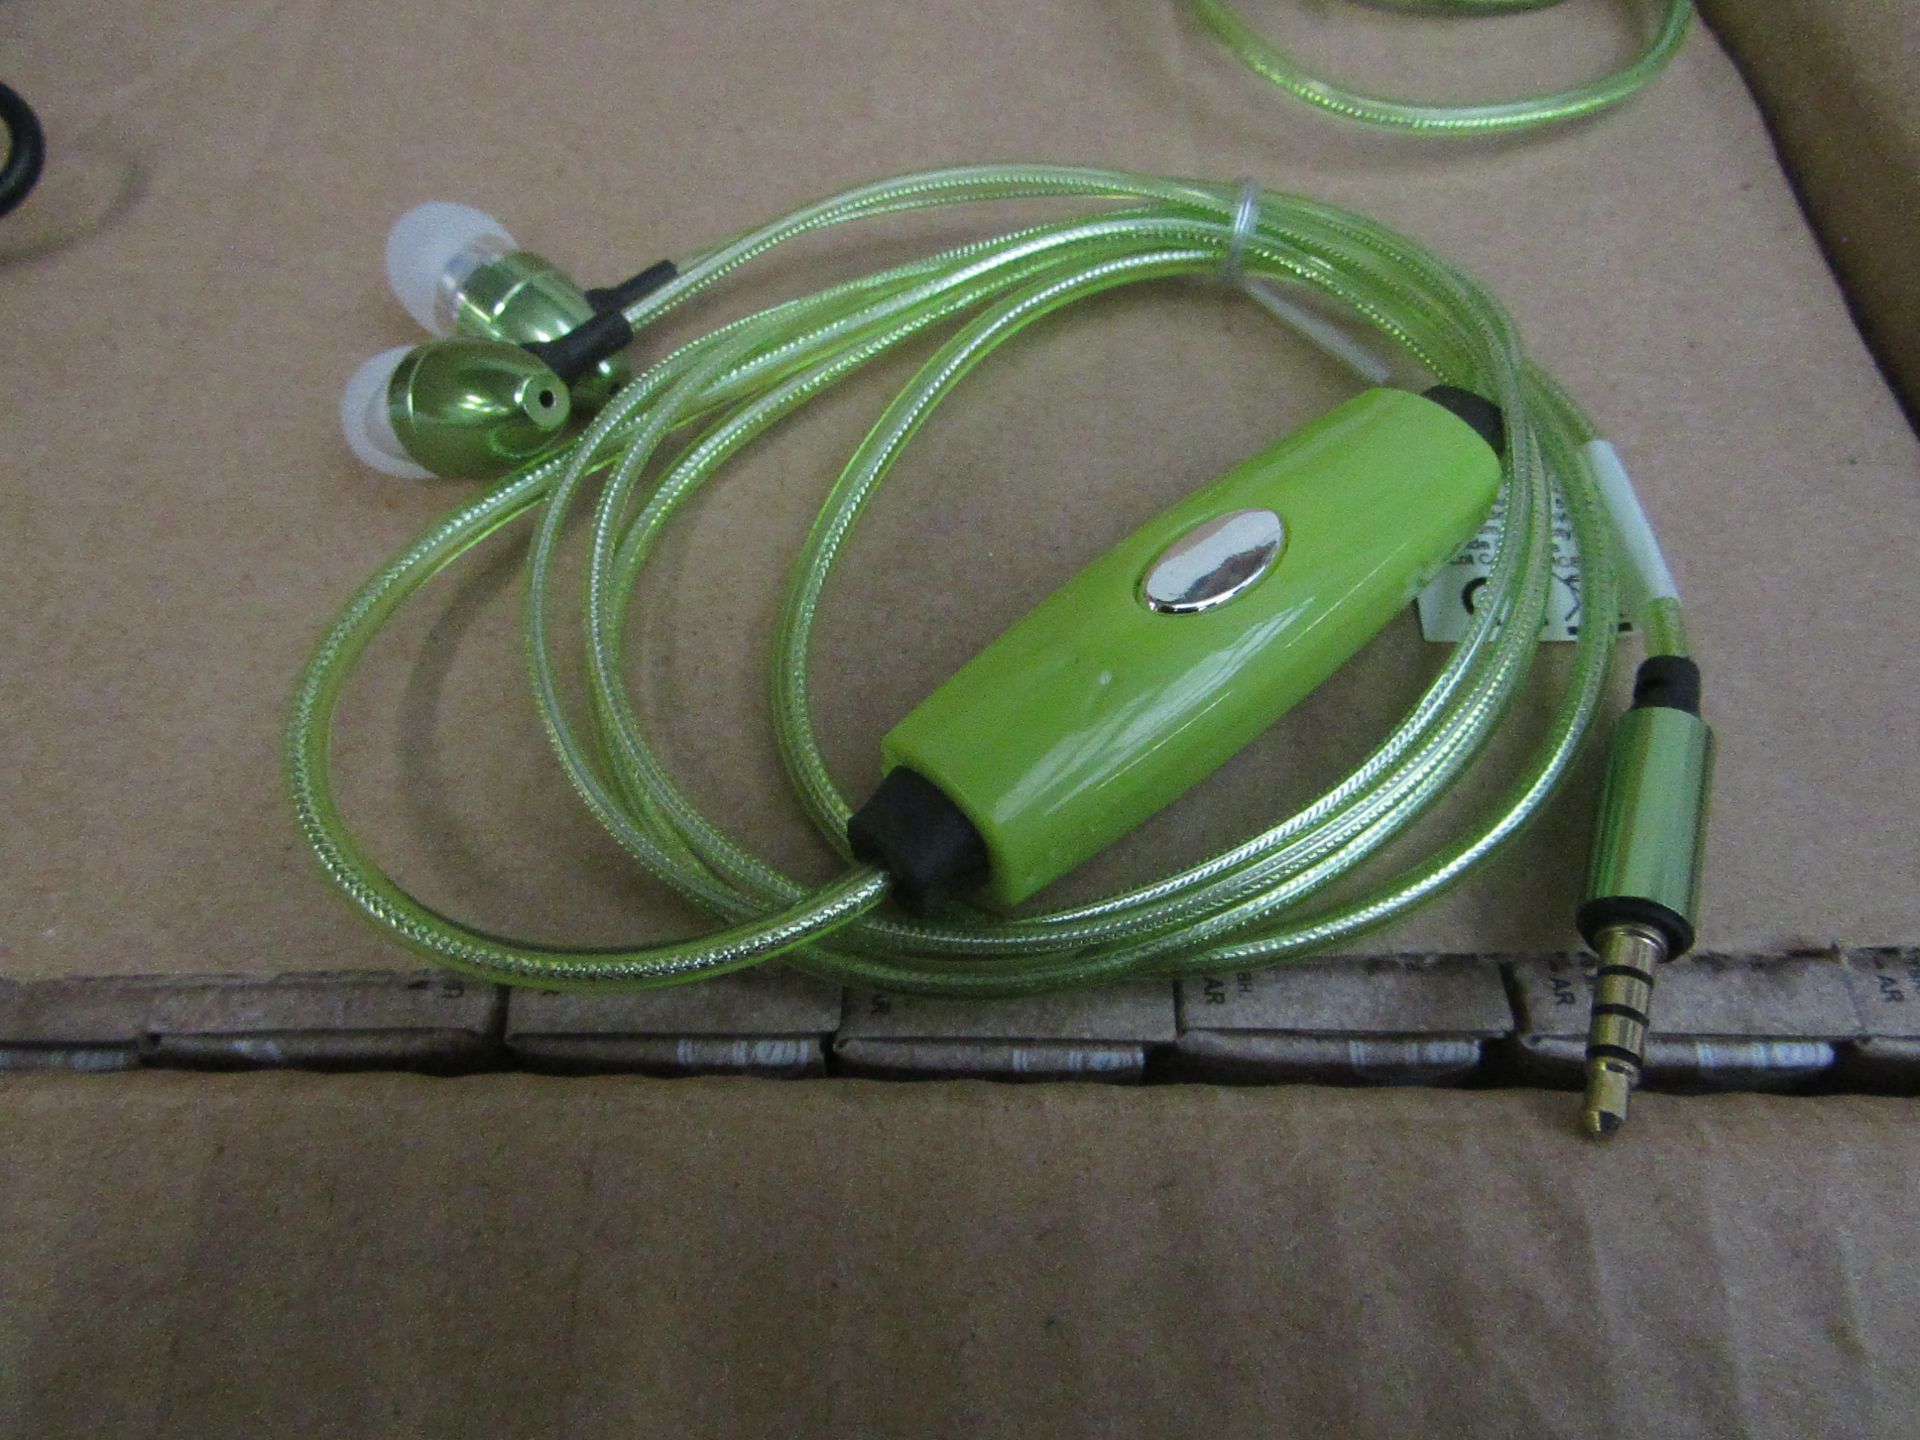 1x Avon - Gift Bouique - Green LED EarBuds - New & Boxed. RRP £15 Each.